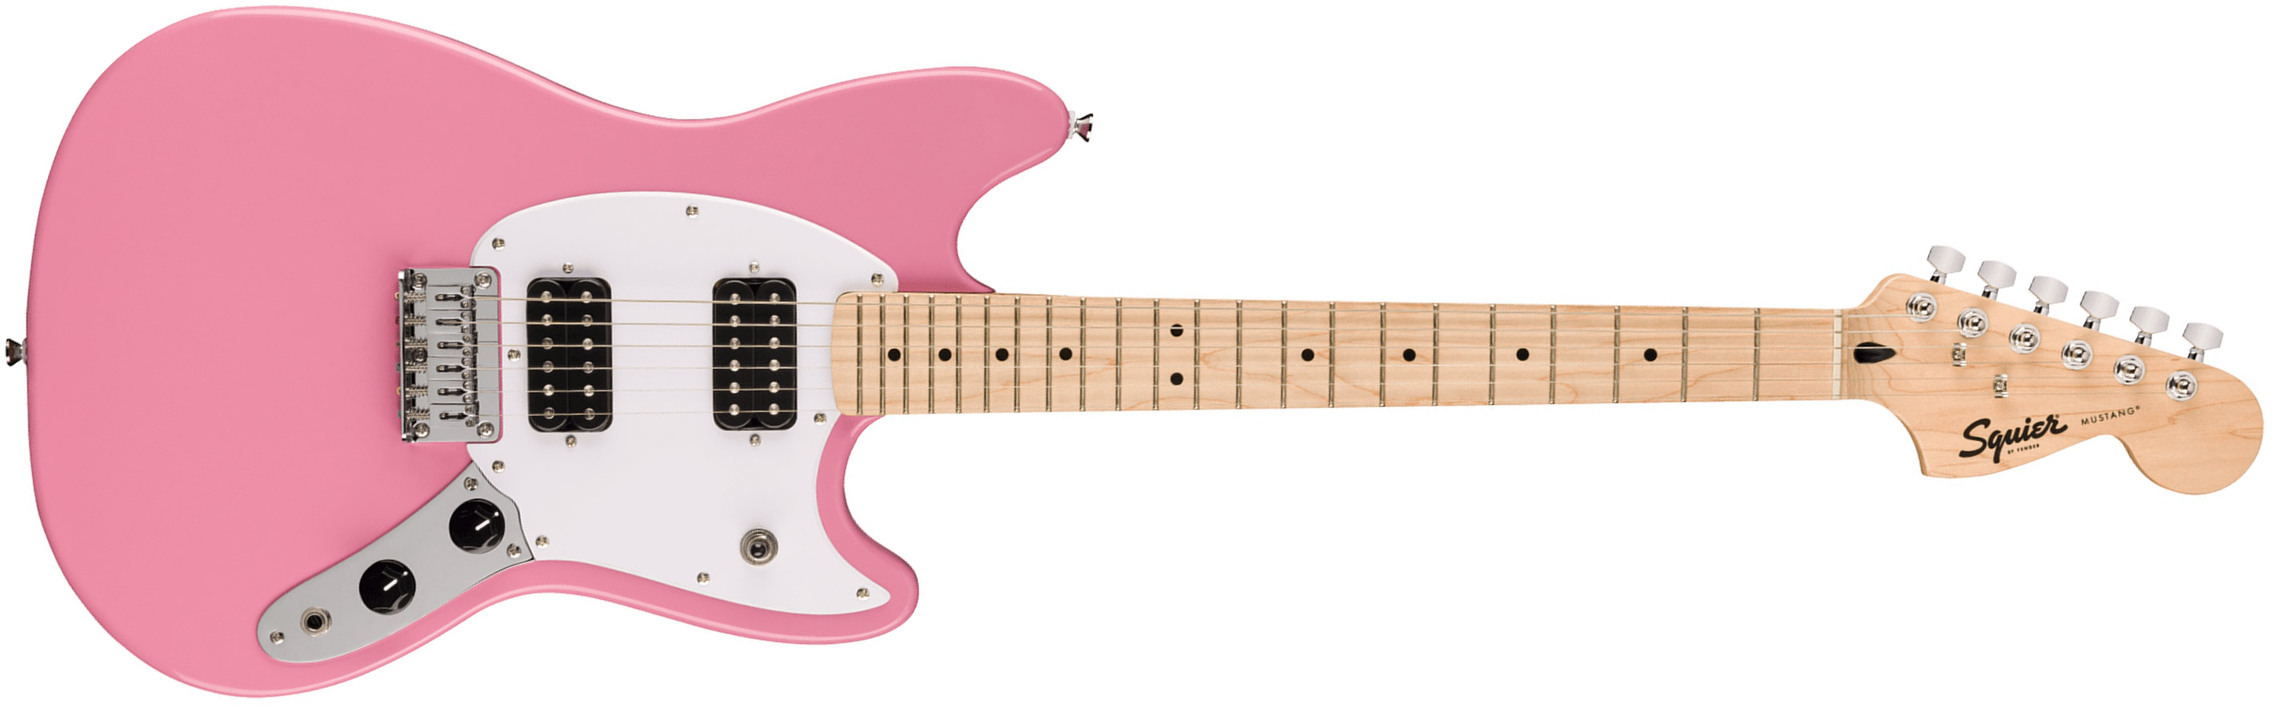 Squier Mustang Sonic Hh 2h Ht Mn - Flash Pink - Retro rock electric guitar - Main picture